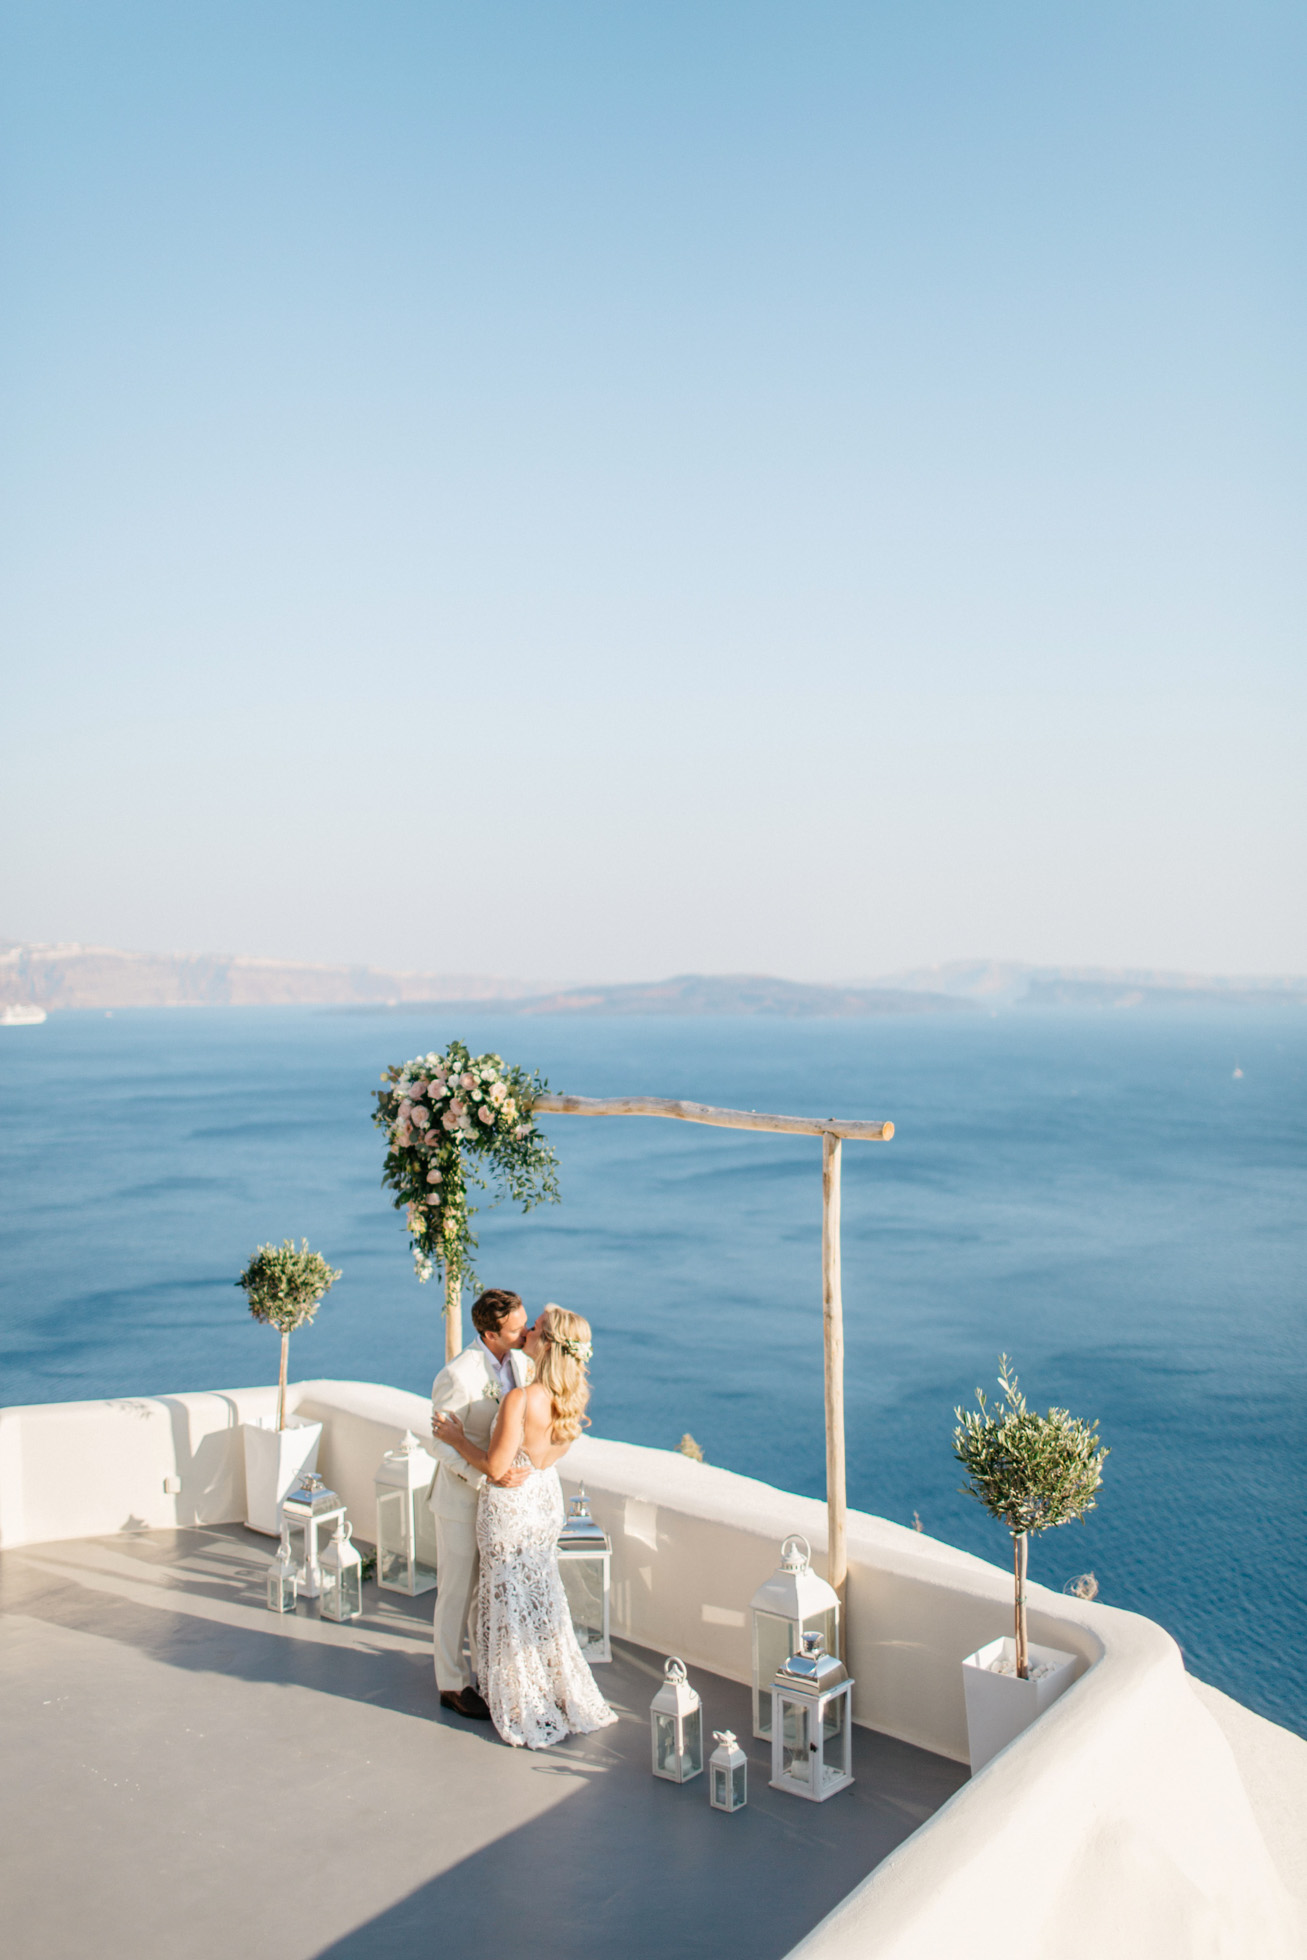 Beautiful wedding ceremony in Canaves Suites Oia Santorini.